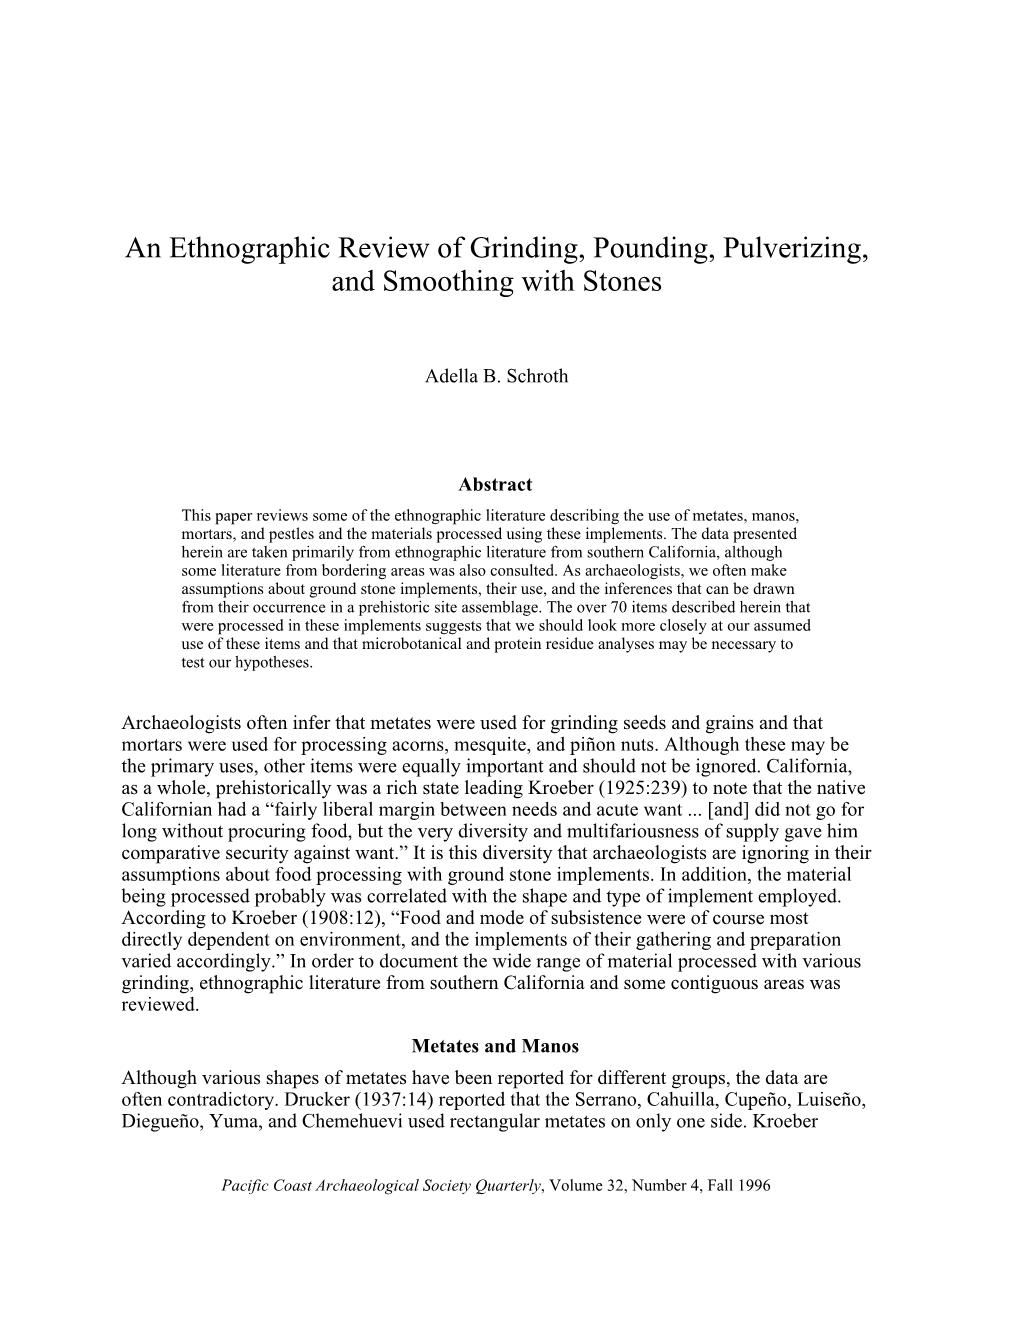 An Ethnographic Review of Grinding, Pounding, Pulverizing, and Smoothing with Stones